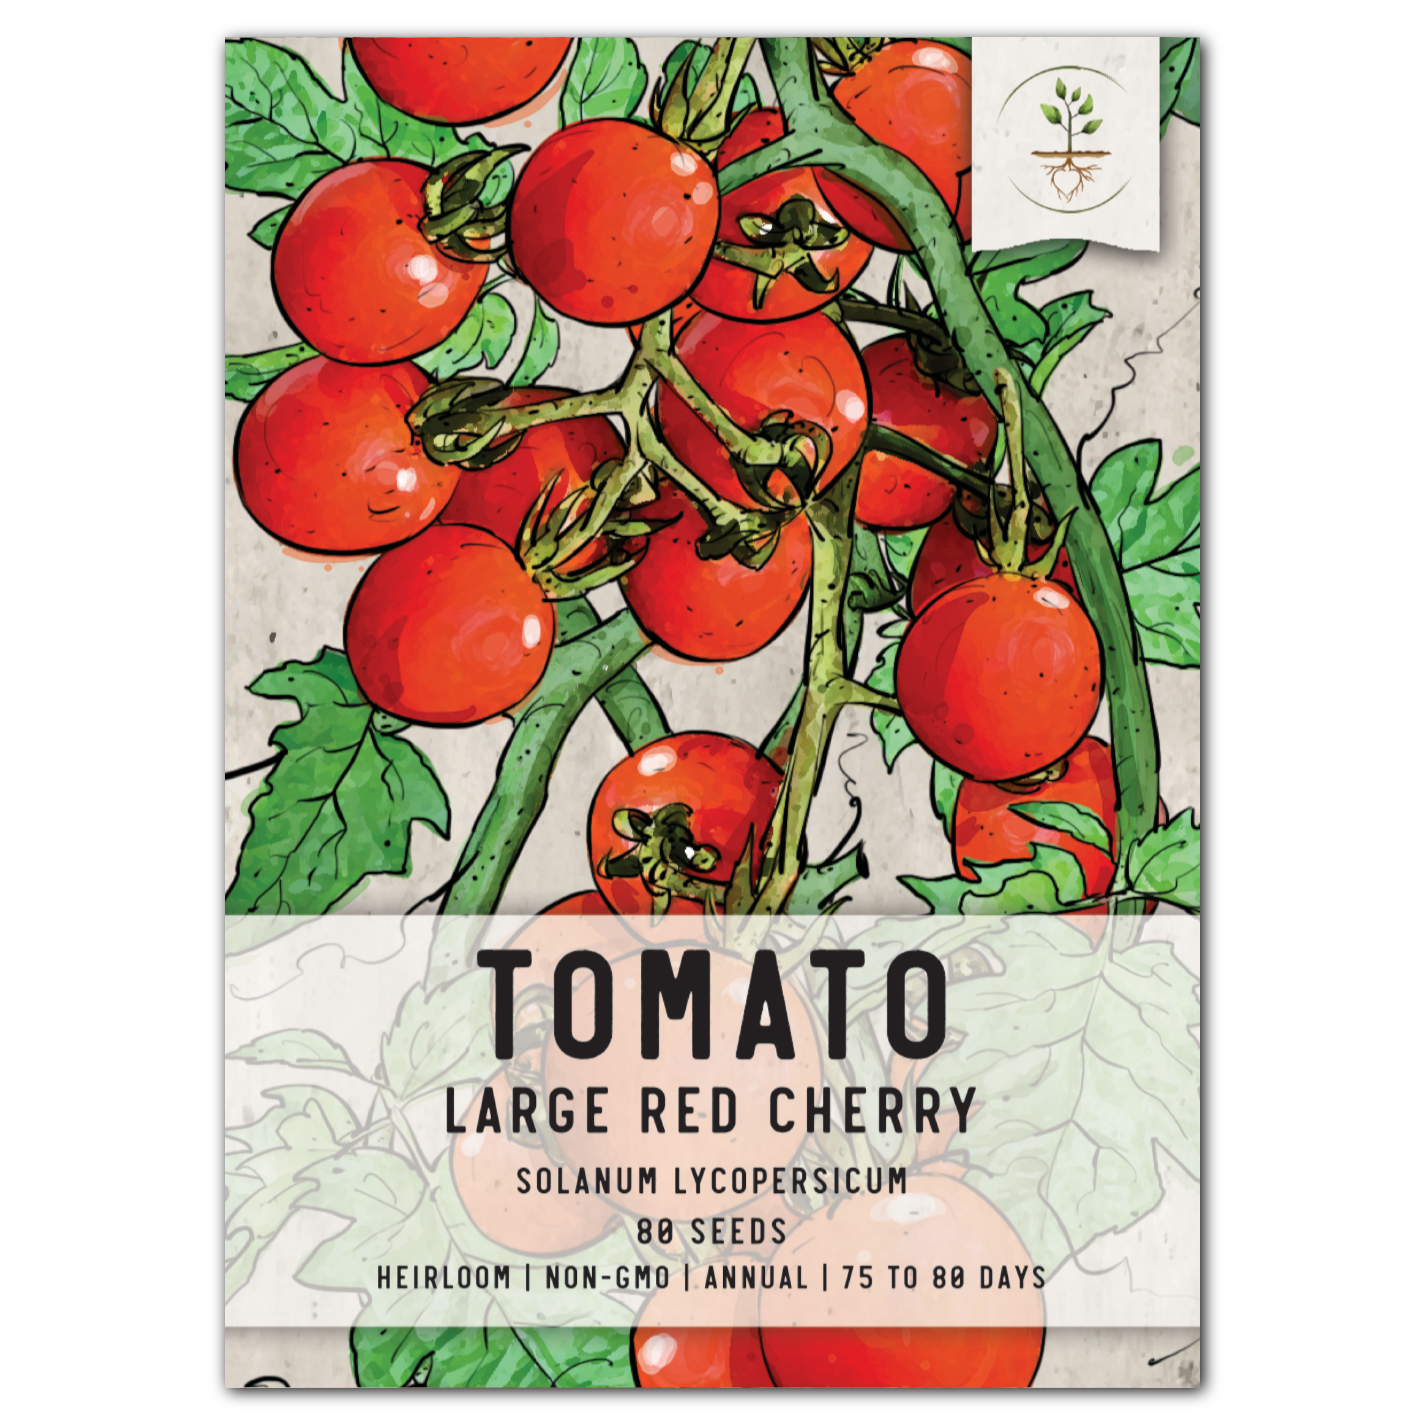 large red cherry tomato seeds for planting